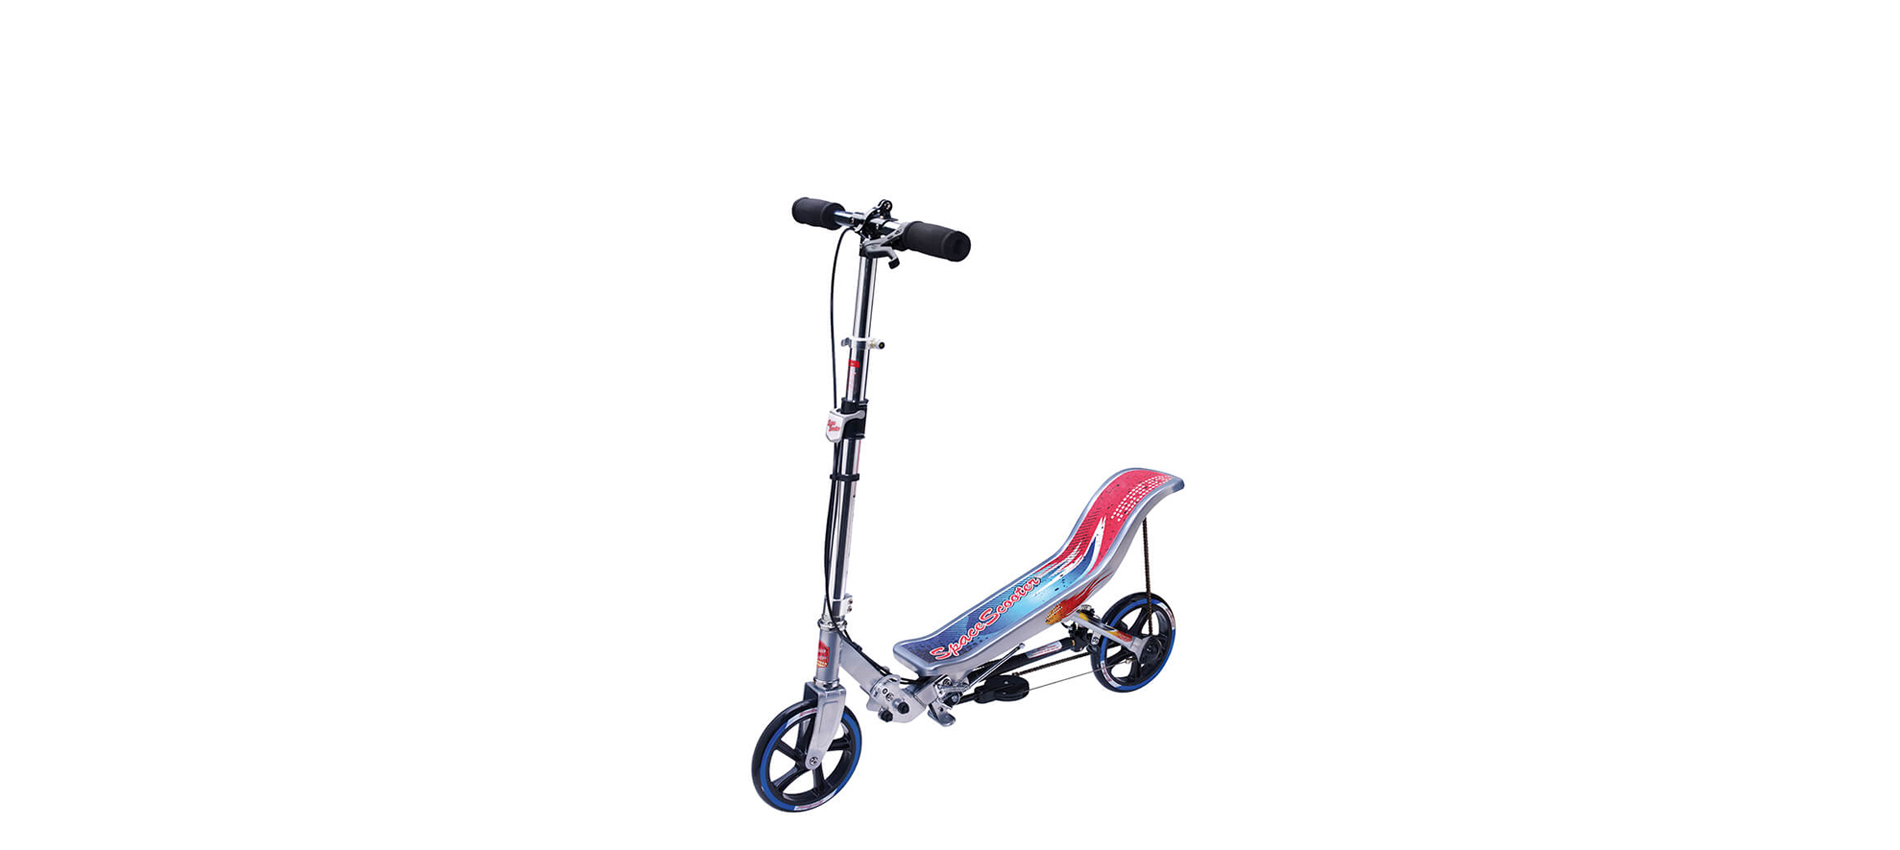 Space Scooter X580 series